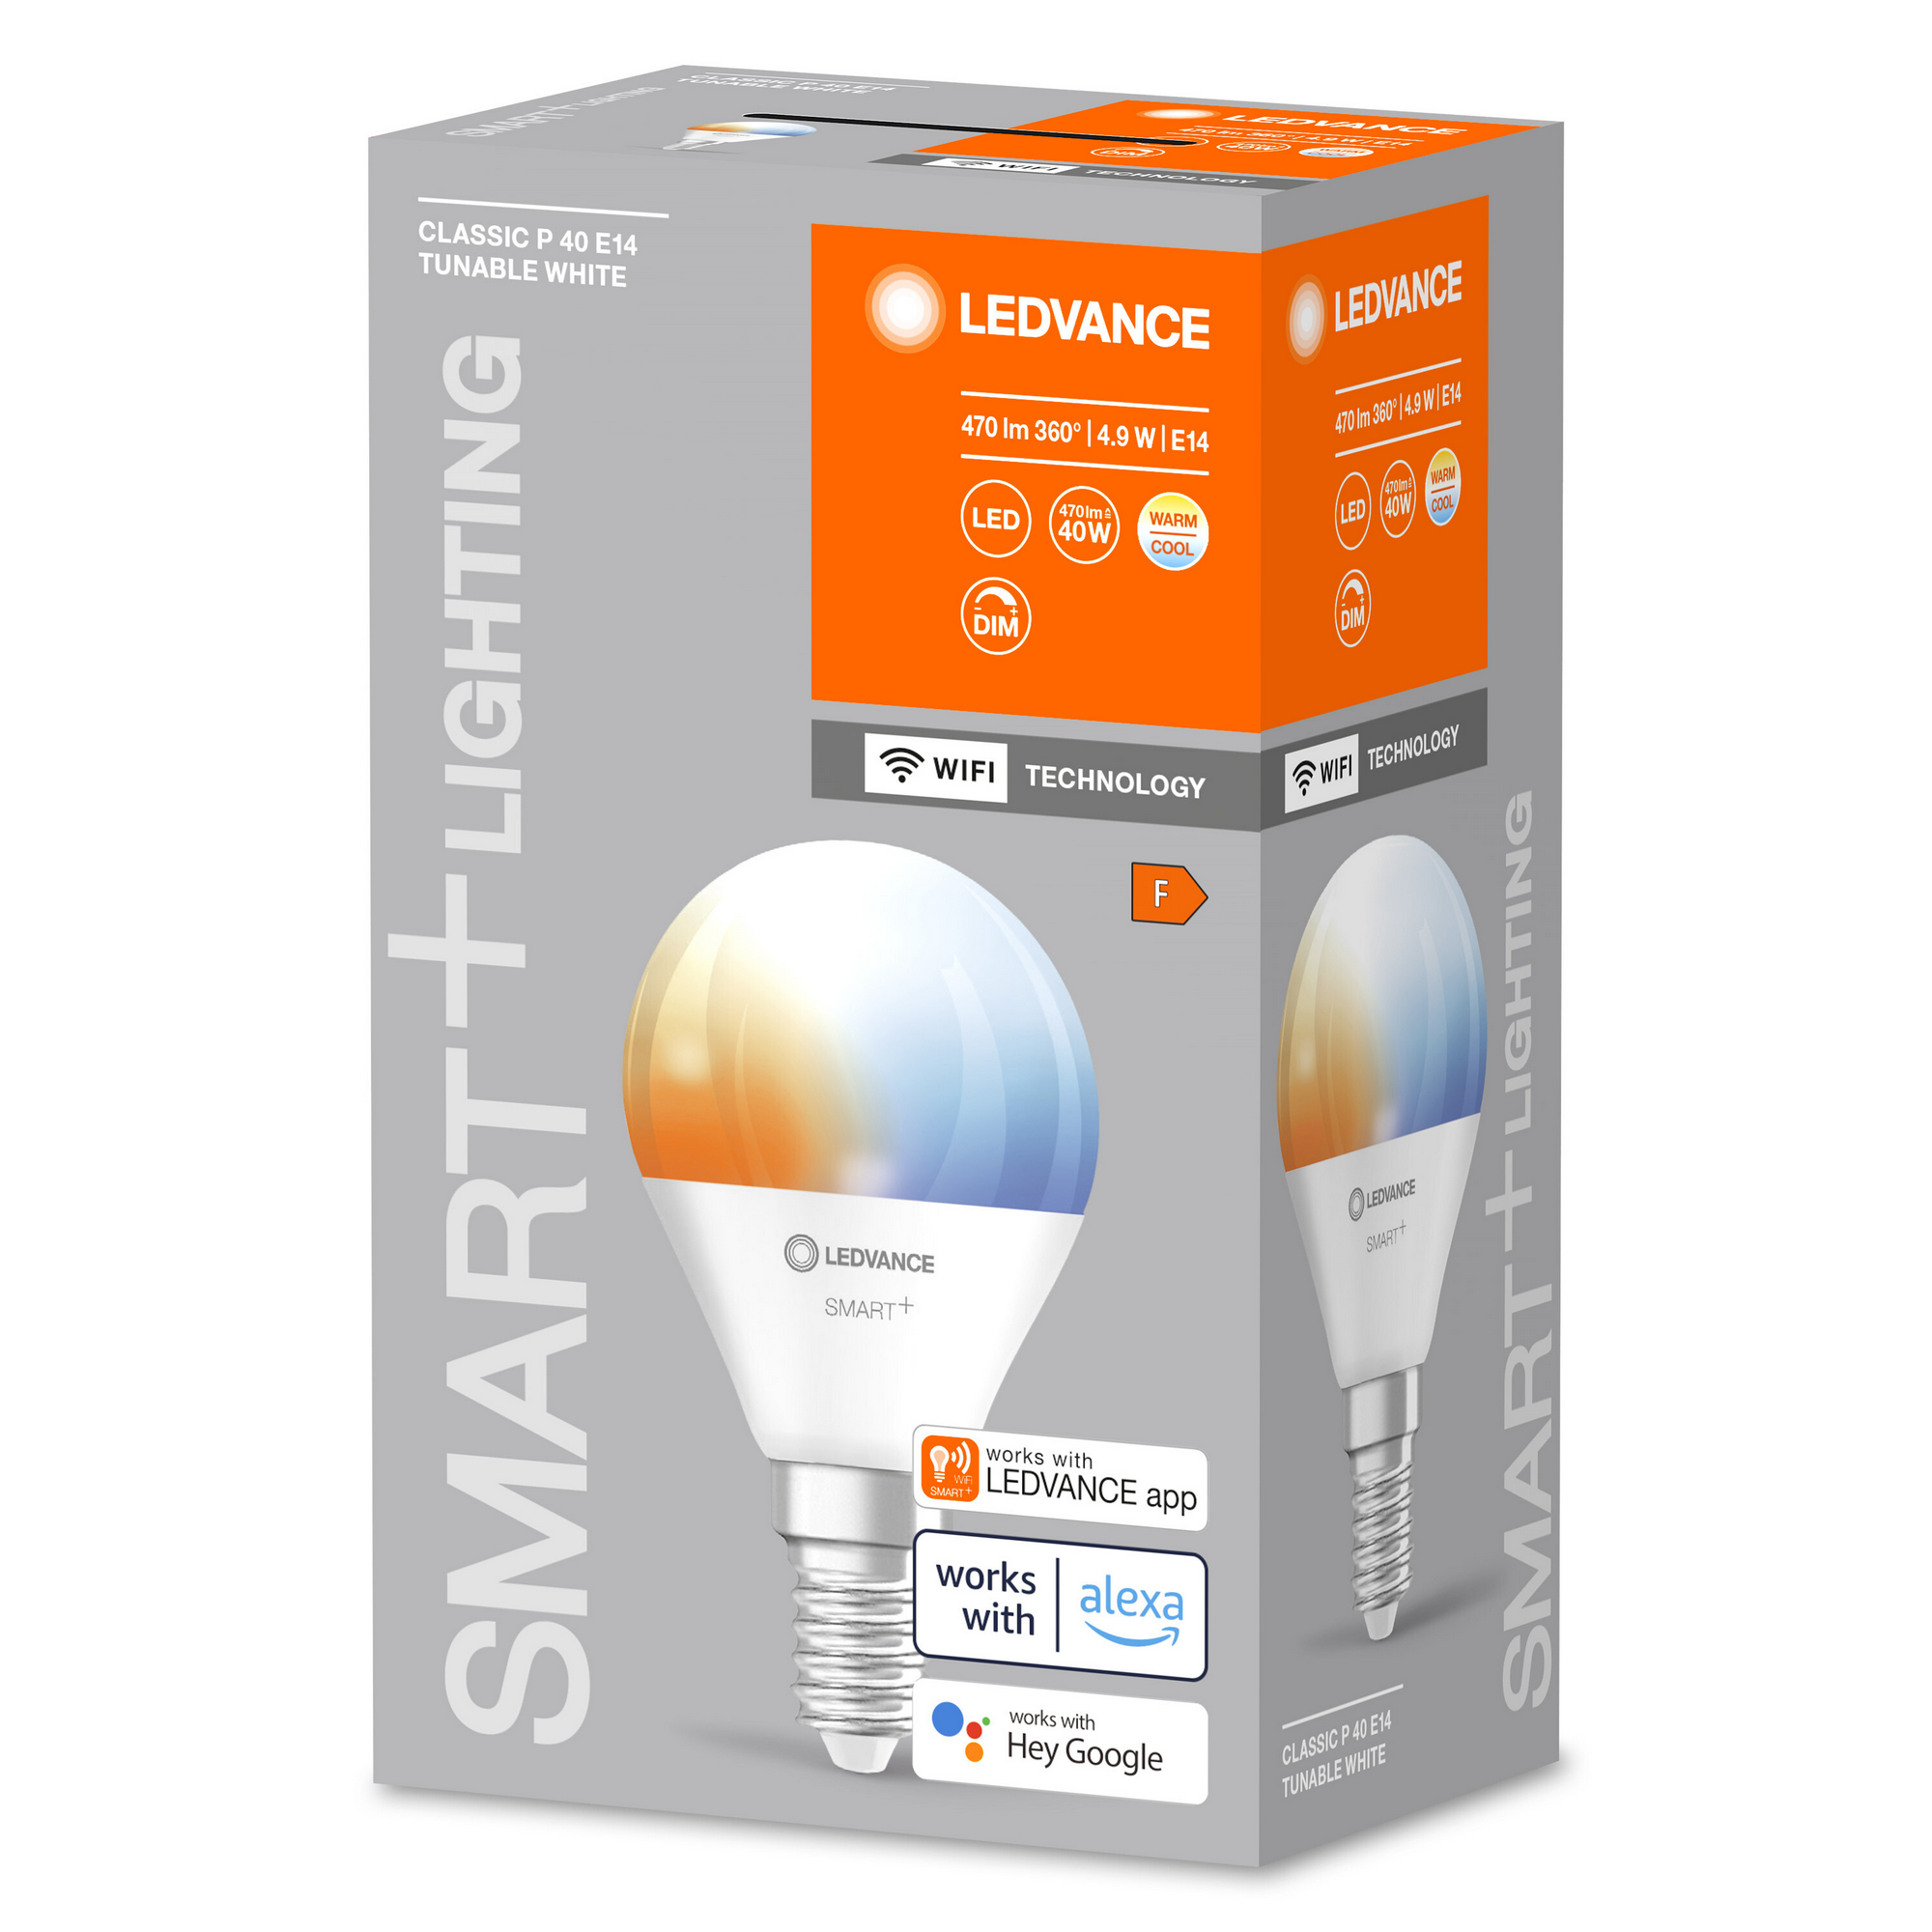 LED-Lampe 'Smart+ WiFi CLP' warm/kaltweiß 4,9 W E14 470 lm, dimmbar + product picture